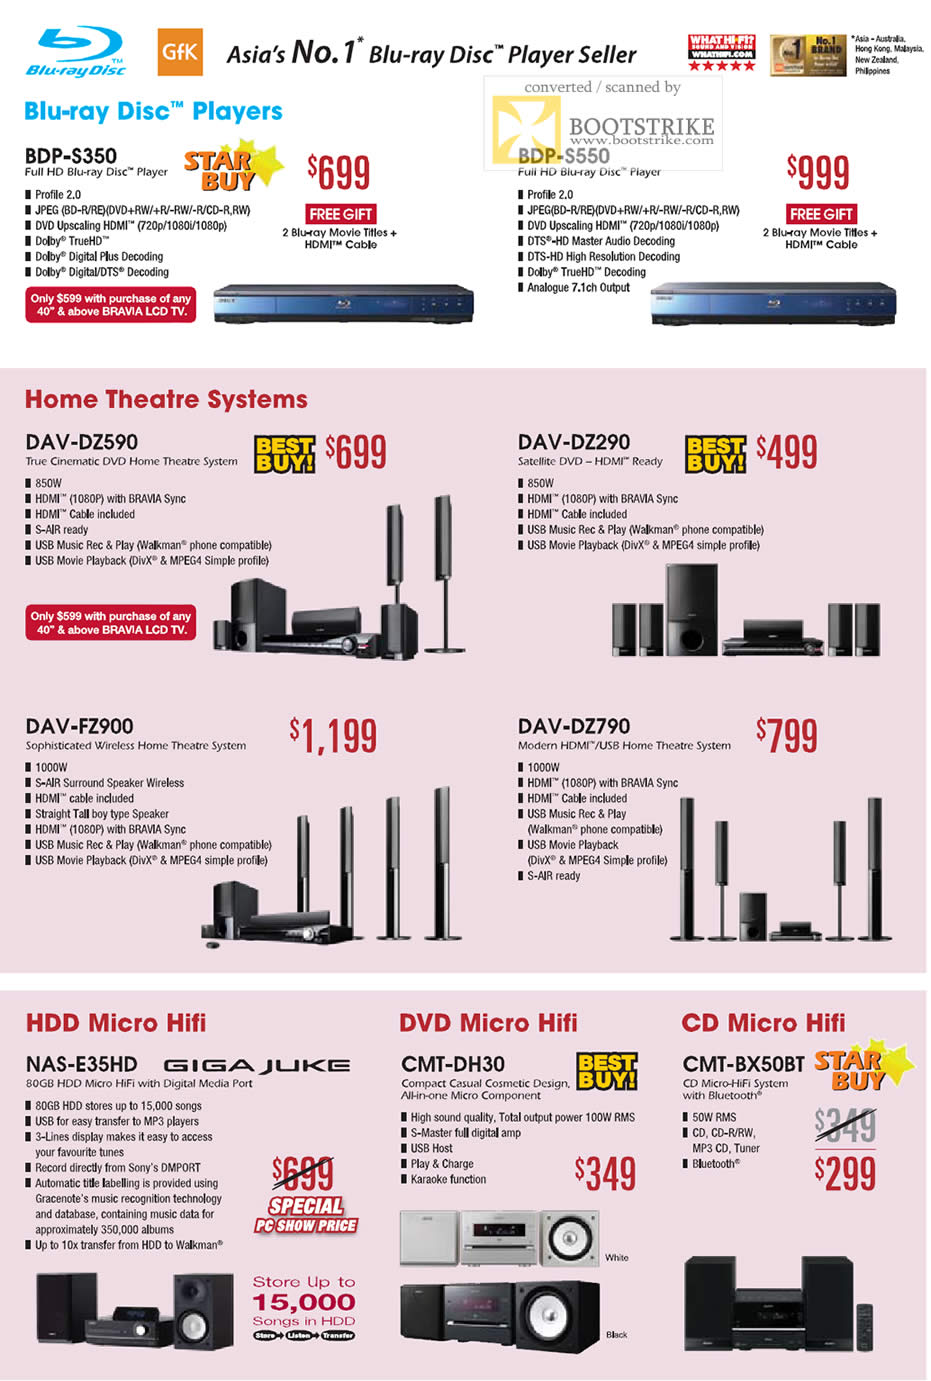 PC Show 2009 price list image brochure of Sony Blu-Ray Disc Players Home Theatre Systems HDD Micro Hifi DVD CD